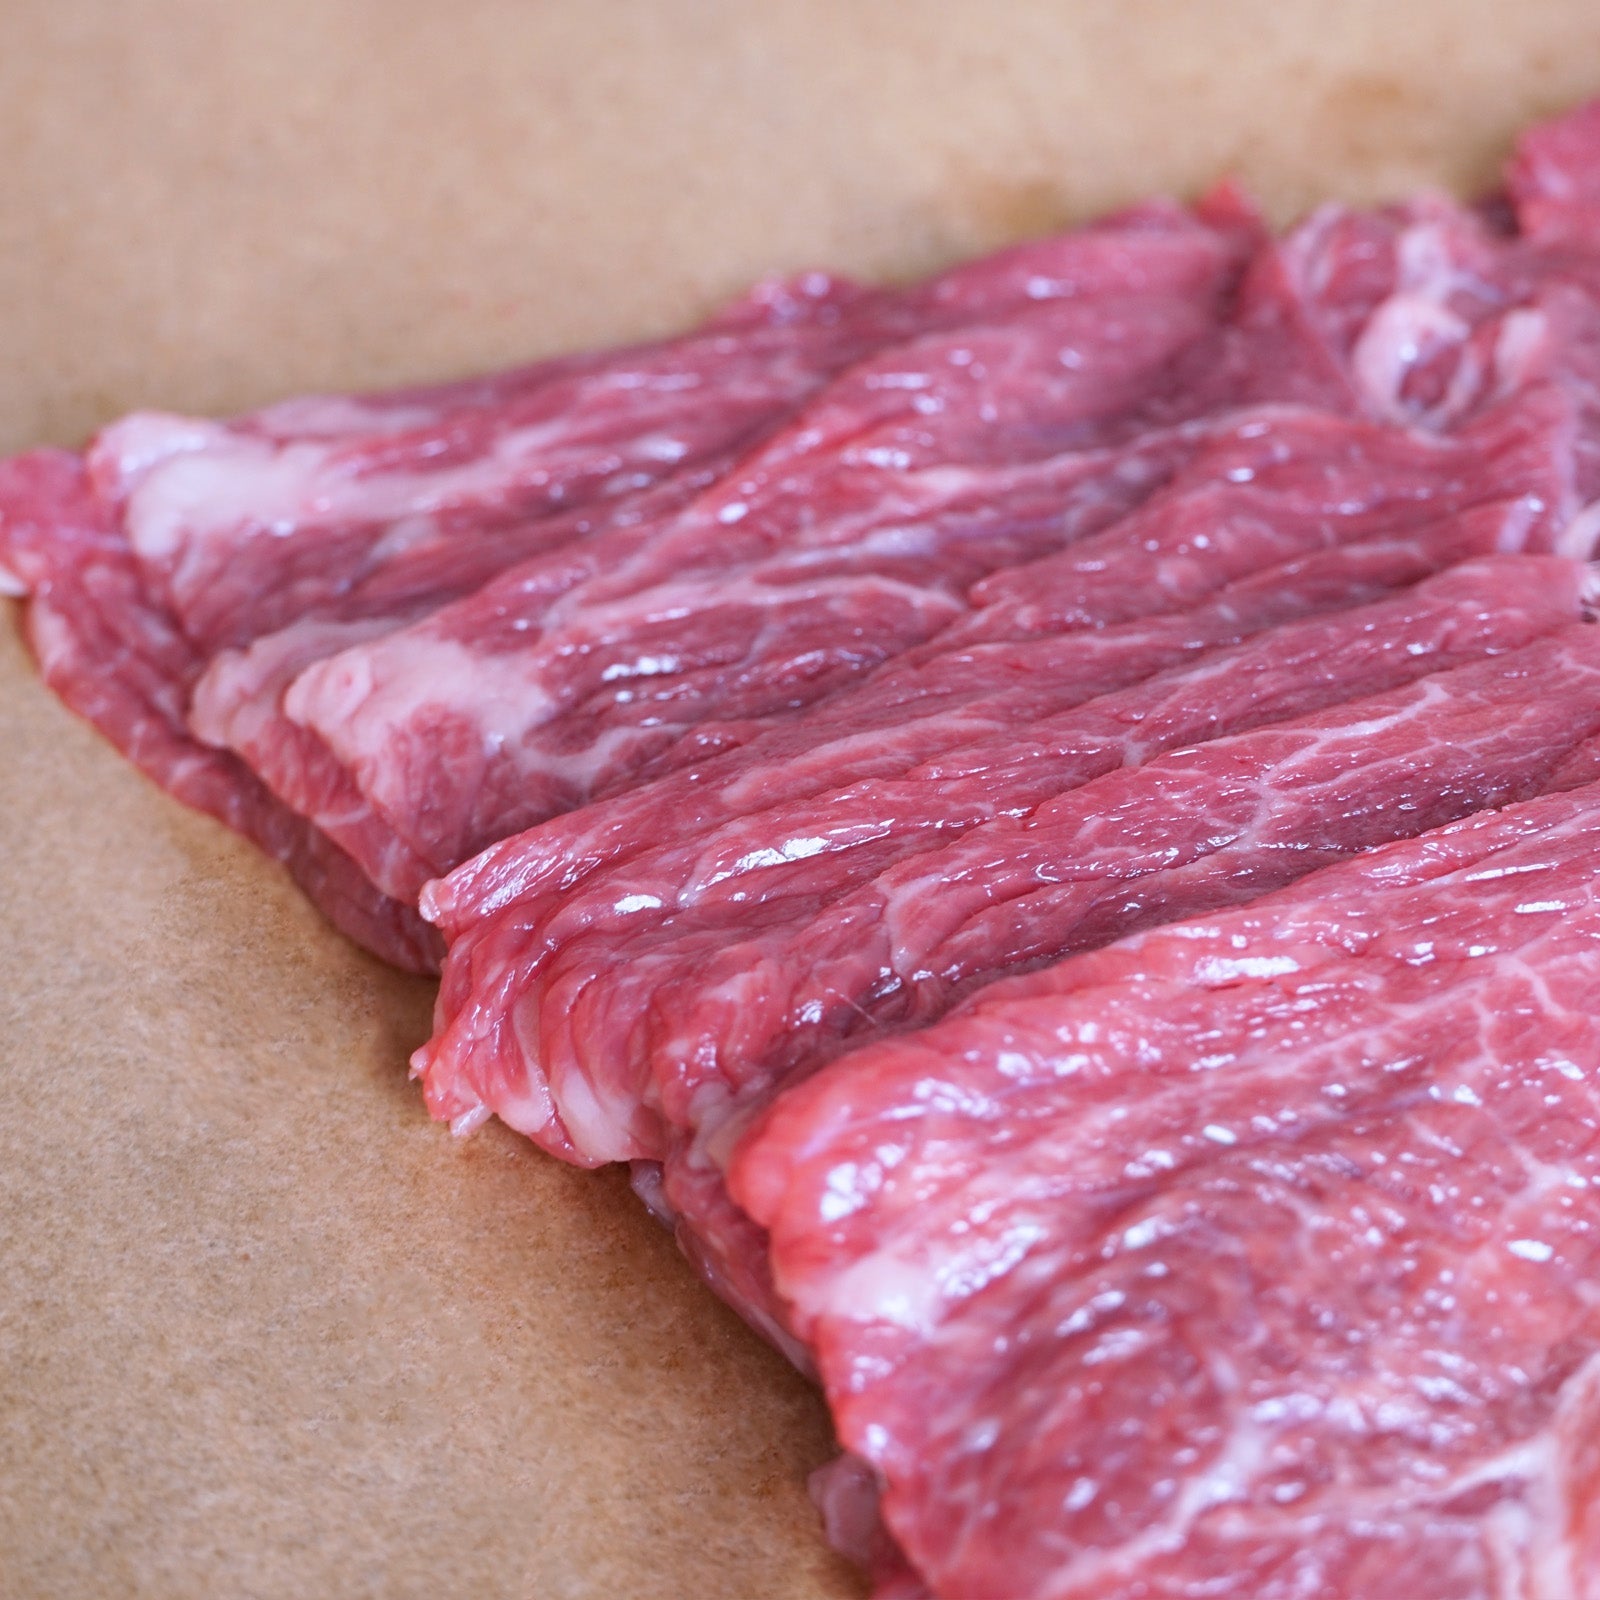 Japanese Range-Free Wagyu Beef Chuck Shoulder Thin Slices from Iwate B-Grade (300g) - Horizon Farms